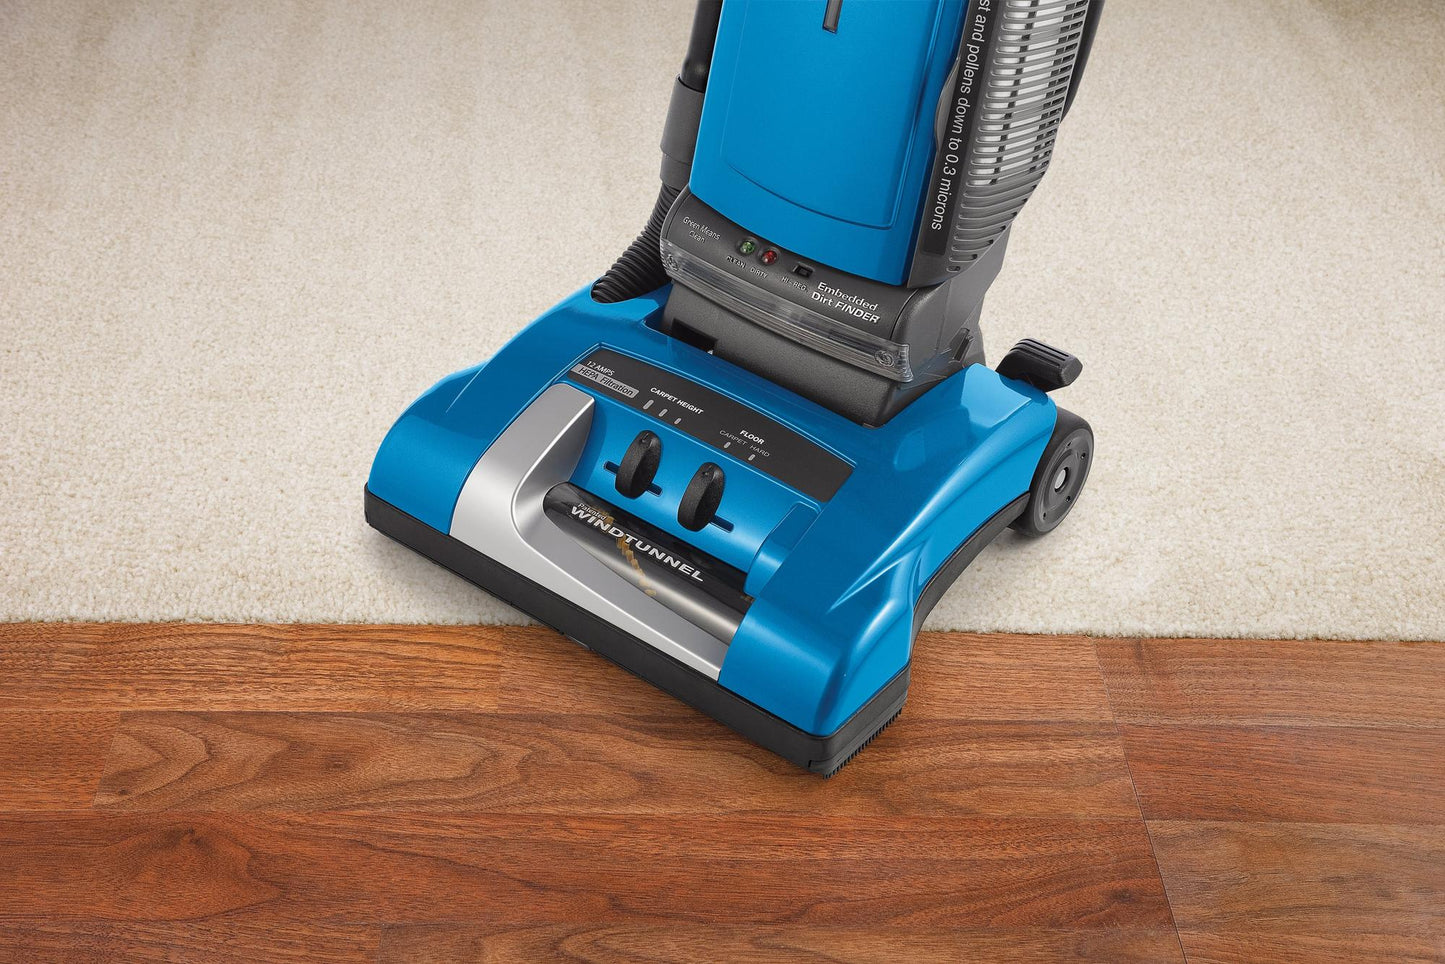 Anniversary Self-Propelled WindTunnel Bagged Upright Vacuum